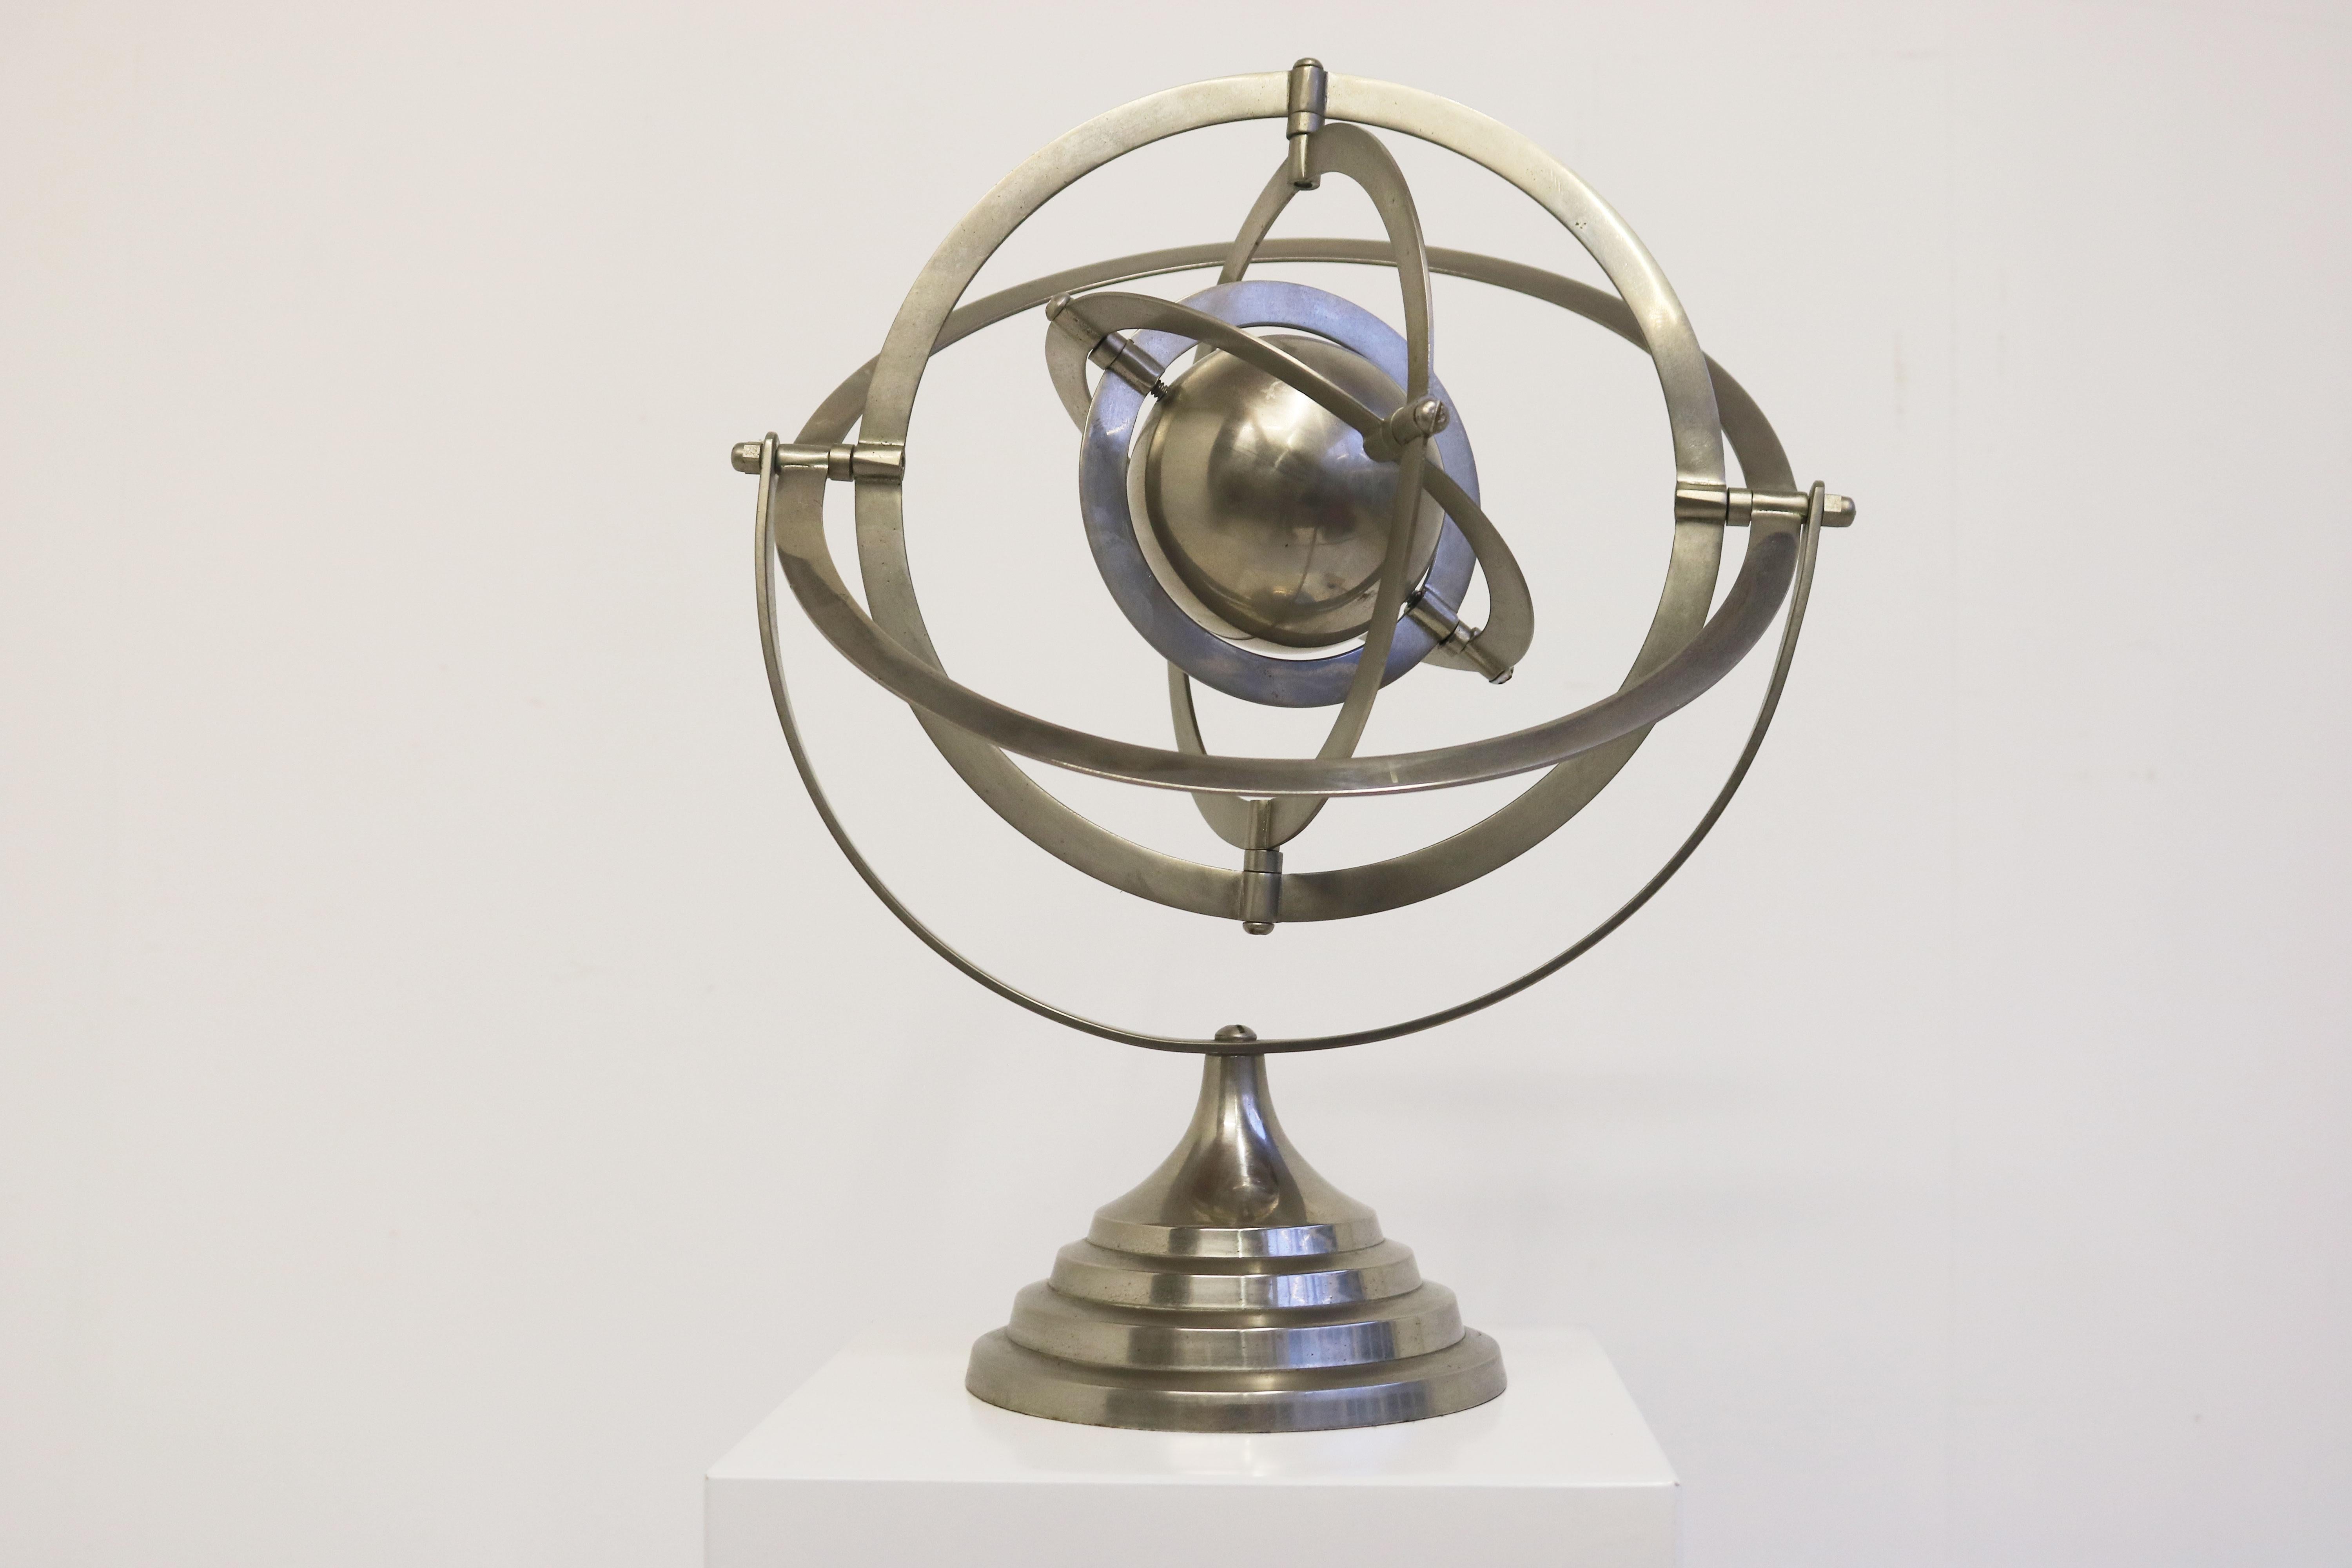 Very decorative & most rare this antique Art Deco Astrolabe from the 1930s 
Made from polished chrome, with 5 turning rings and a large center sphere. 
This would make a stunning decorative piece on any desk or office space 
Amazing for collectors